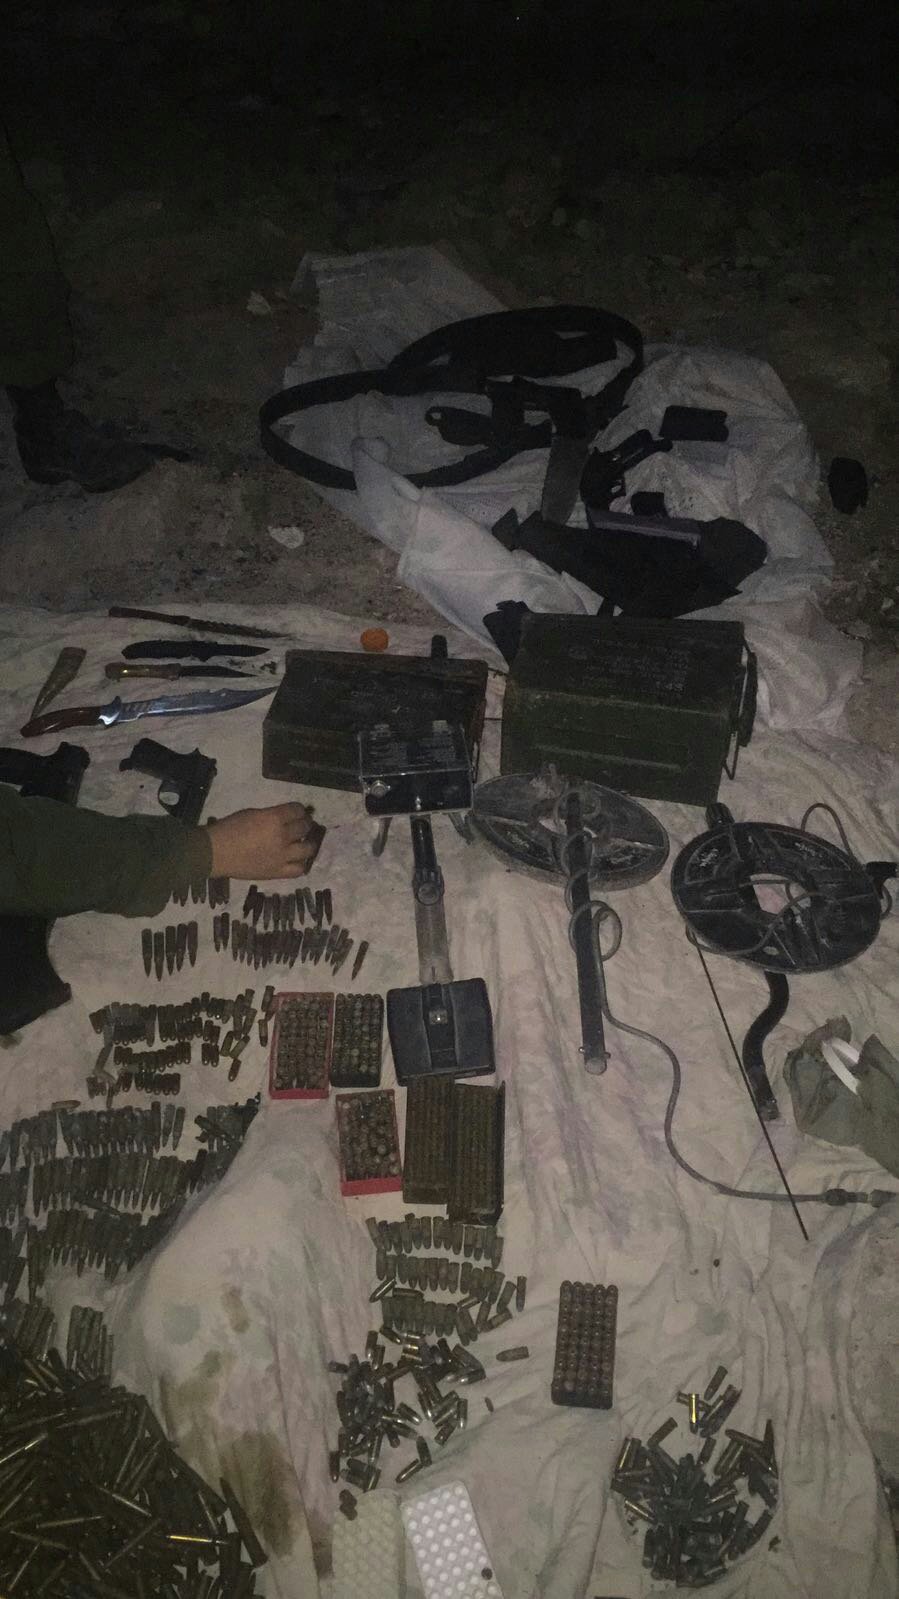 Explosives, ammunition and weapons caught in the operation. - weapon